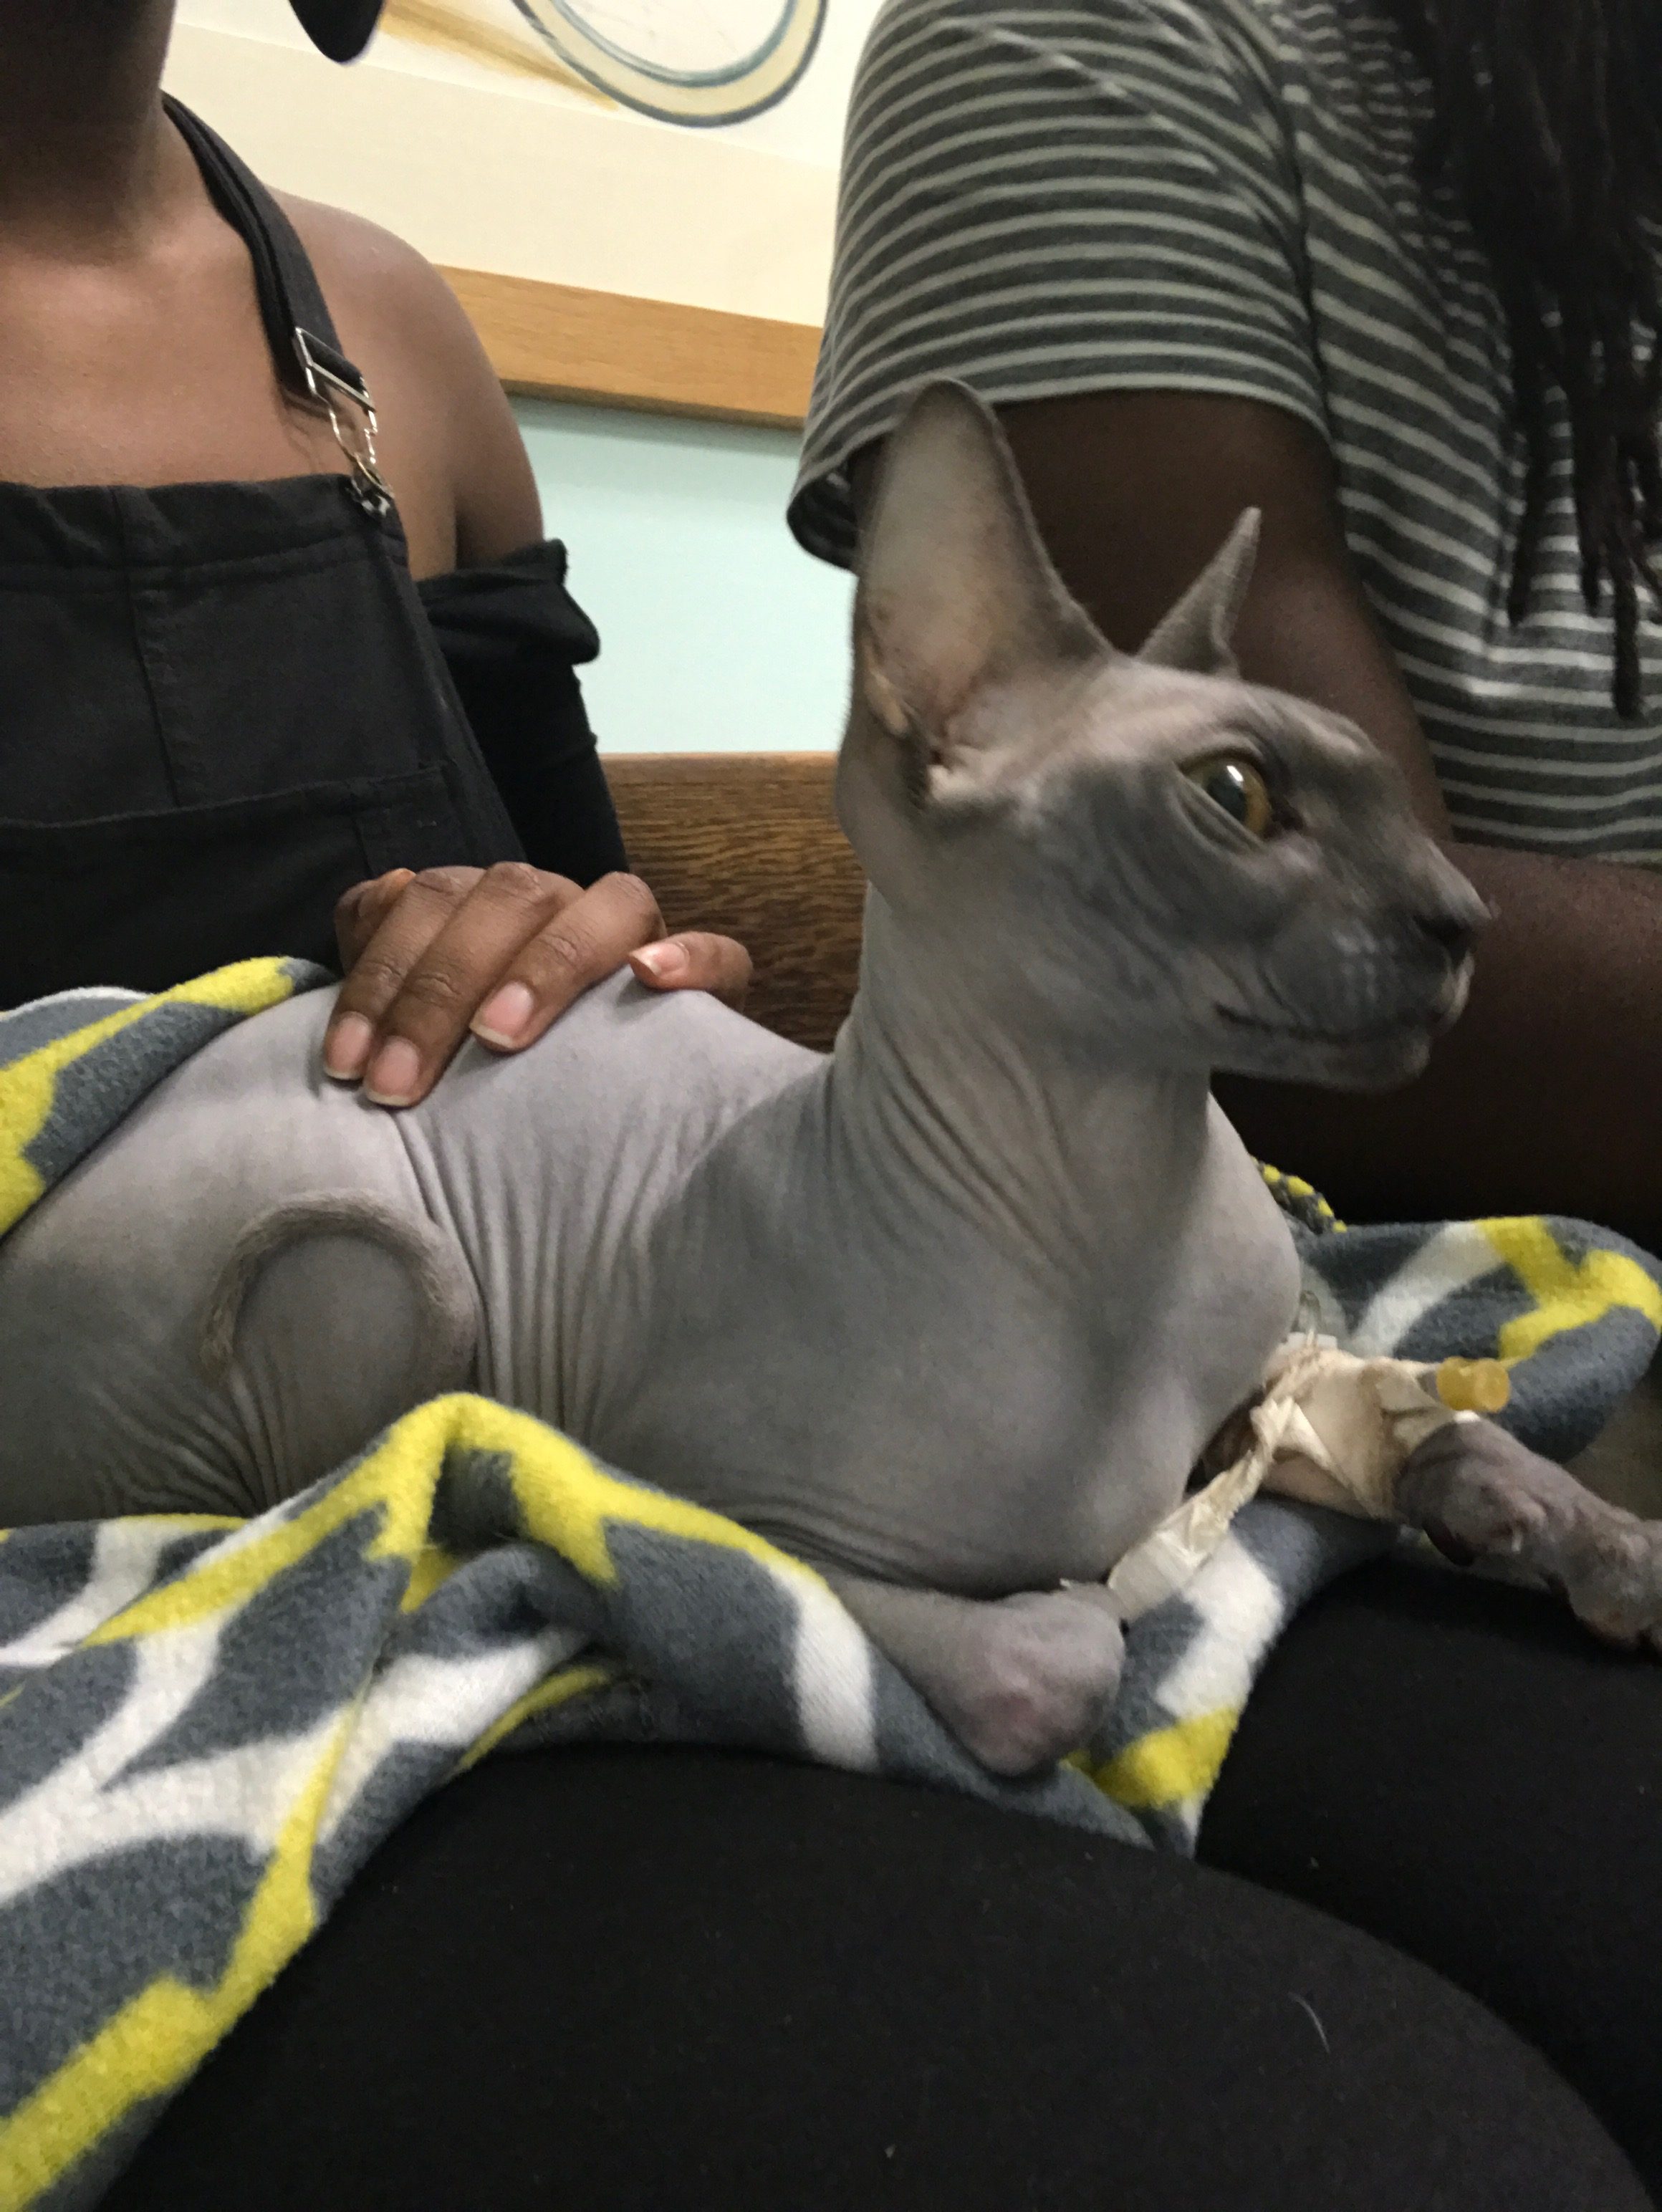 hairless cat in woman's lap